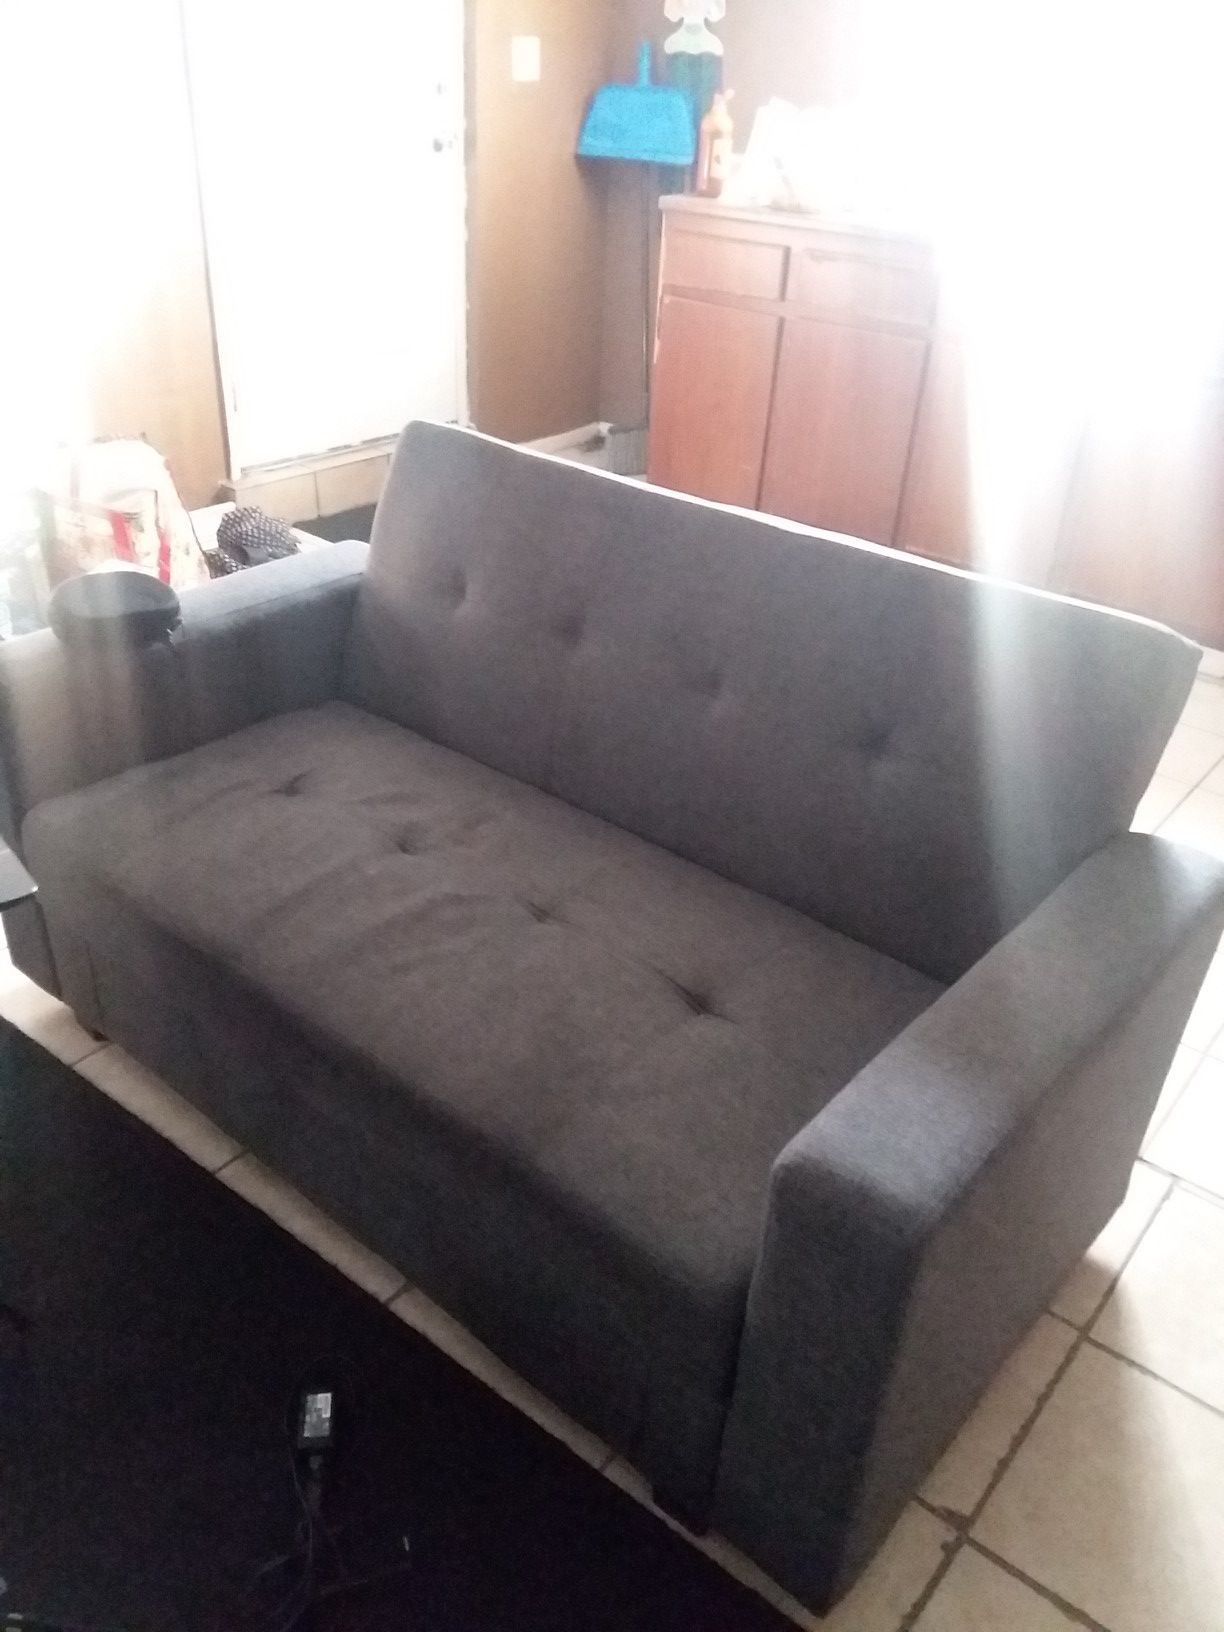 Nice dark gray couch 2 pece can turn in to a 1 full as in the pic..very clean only me AND NO BUGS I LIVE CLEAN